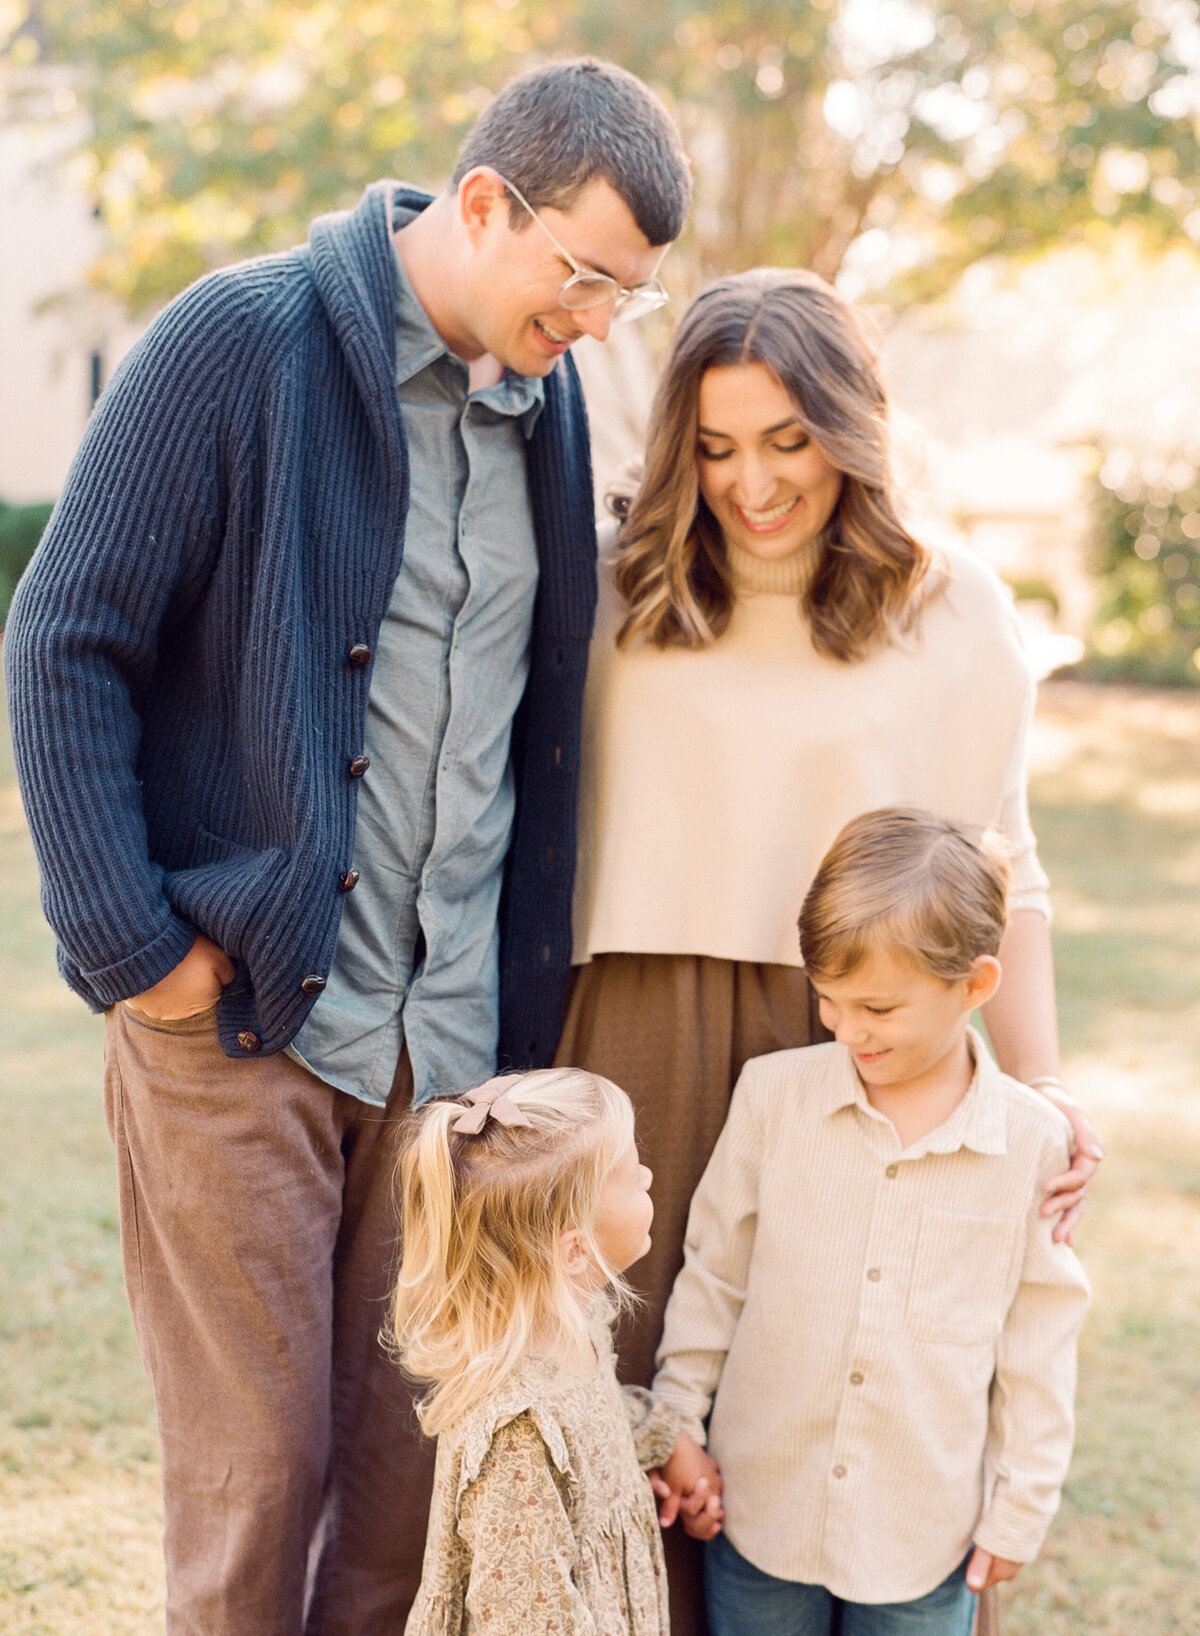 Family laughs during their raleigh portrait session. Family walking during their family portrait session in Wake Forest, NC. Photographed by Raleigh family photographer A.J. Dunlap Photography.